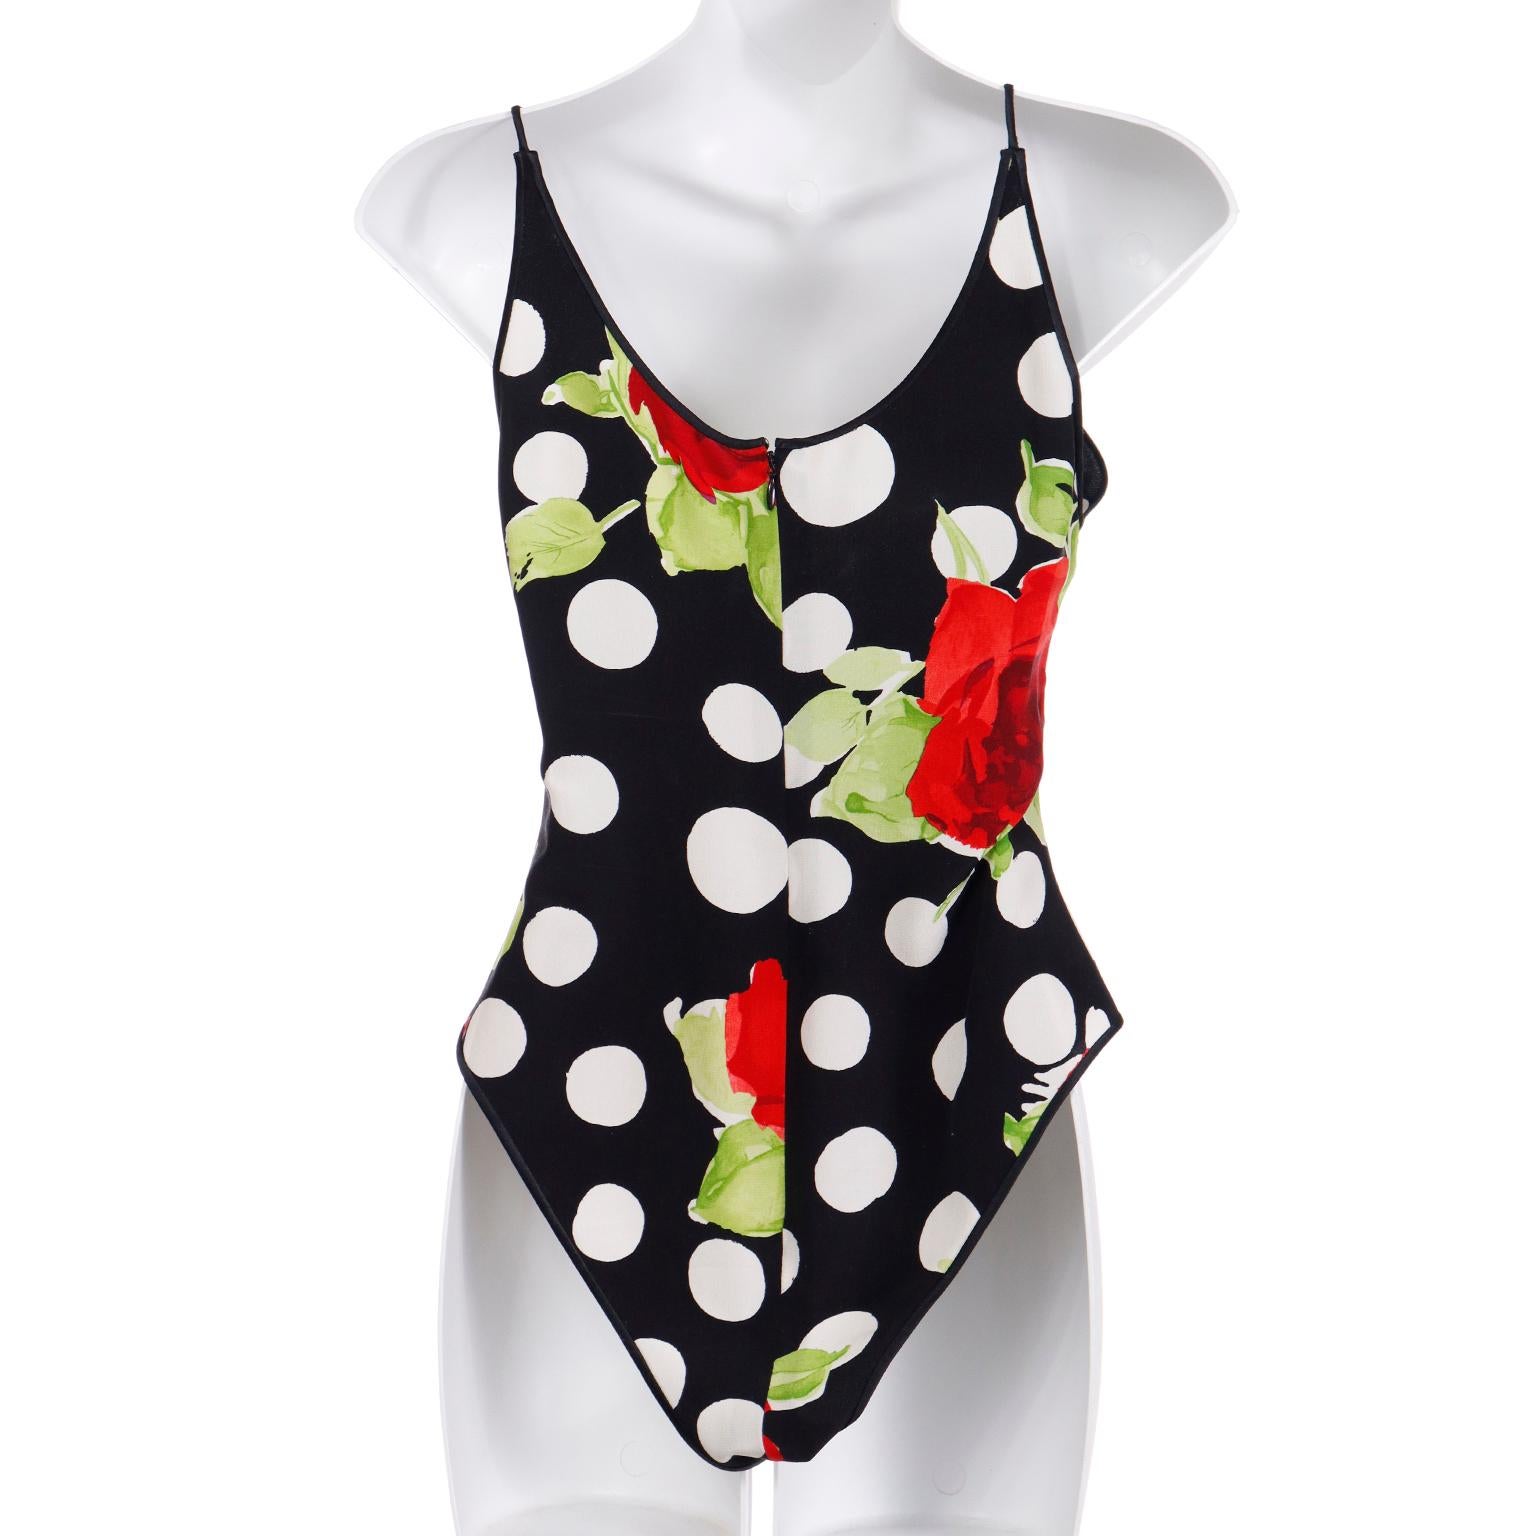 Vintage James Galanos Black & White Dot Red Rose Print Bodysuit & Sarong Skirt In Excellent Condition For Sale In Portland, OR